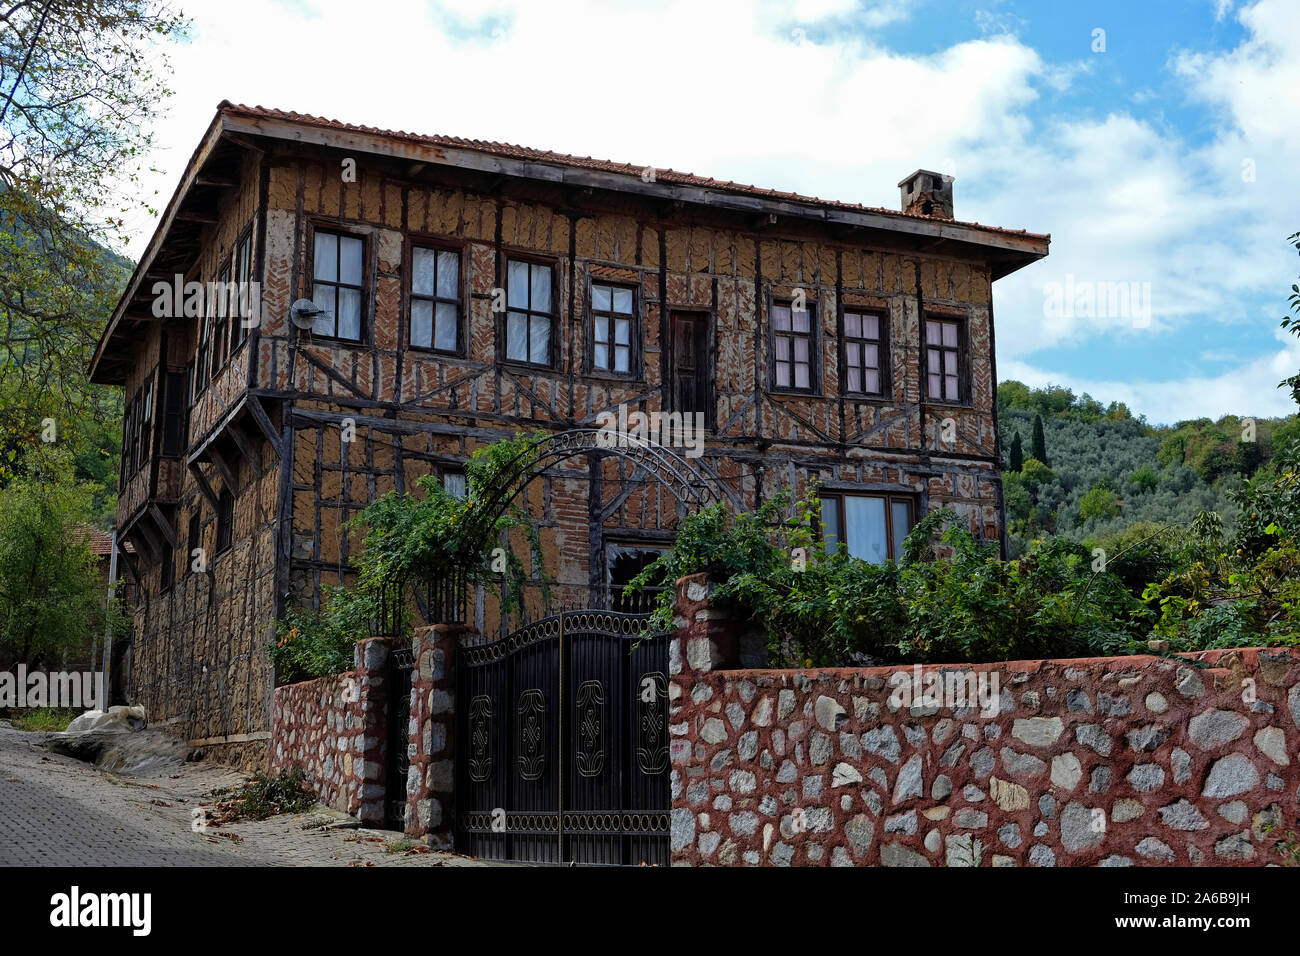 An example of Ottoman architecture in Bursa is the old house in the village of Gürle Stock Photo